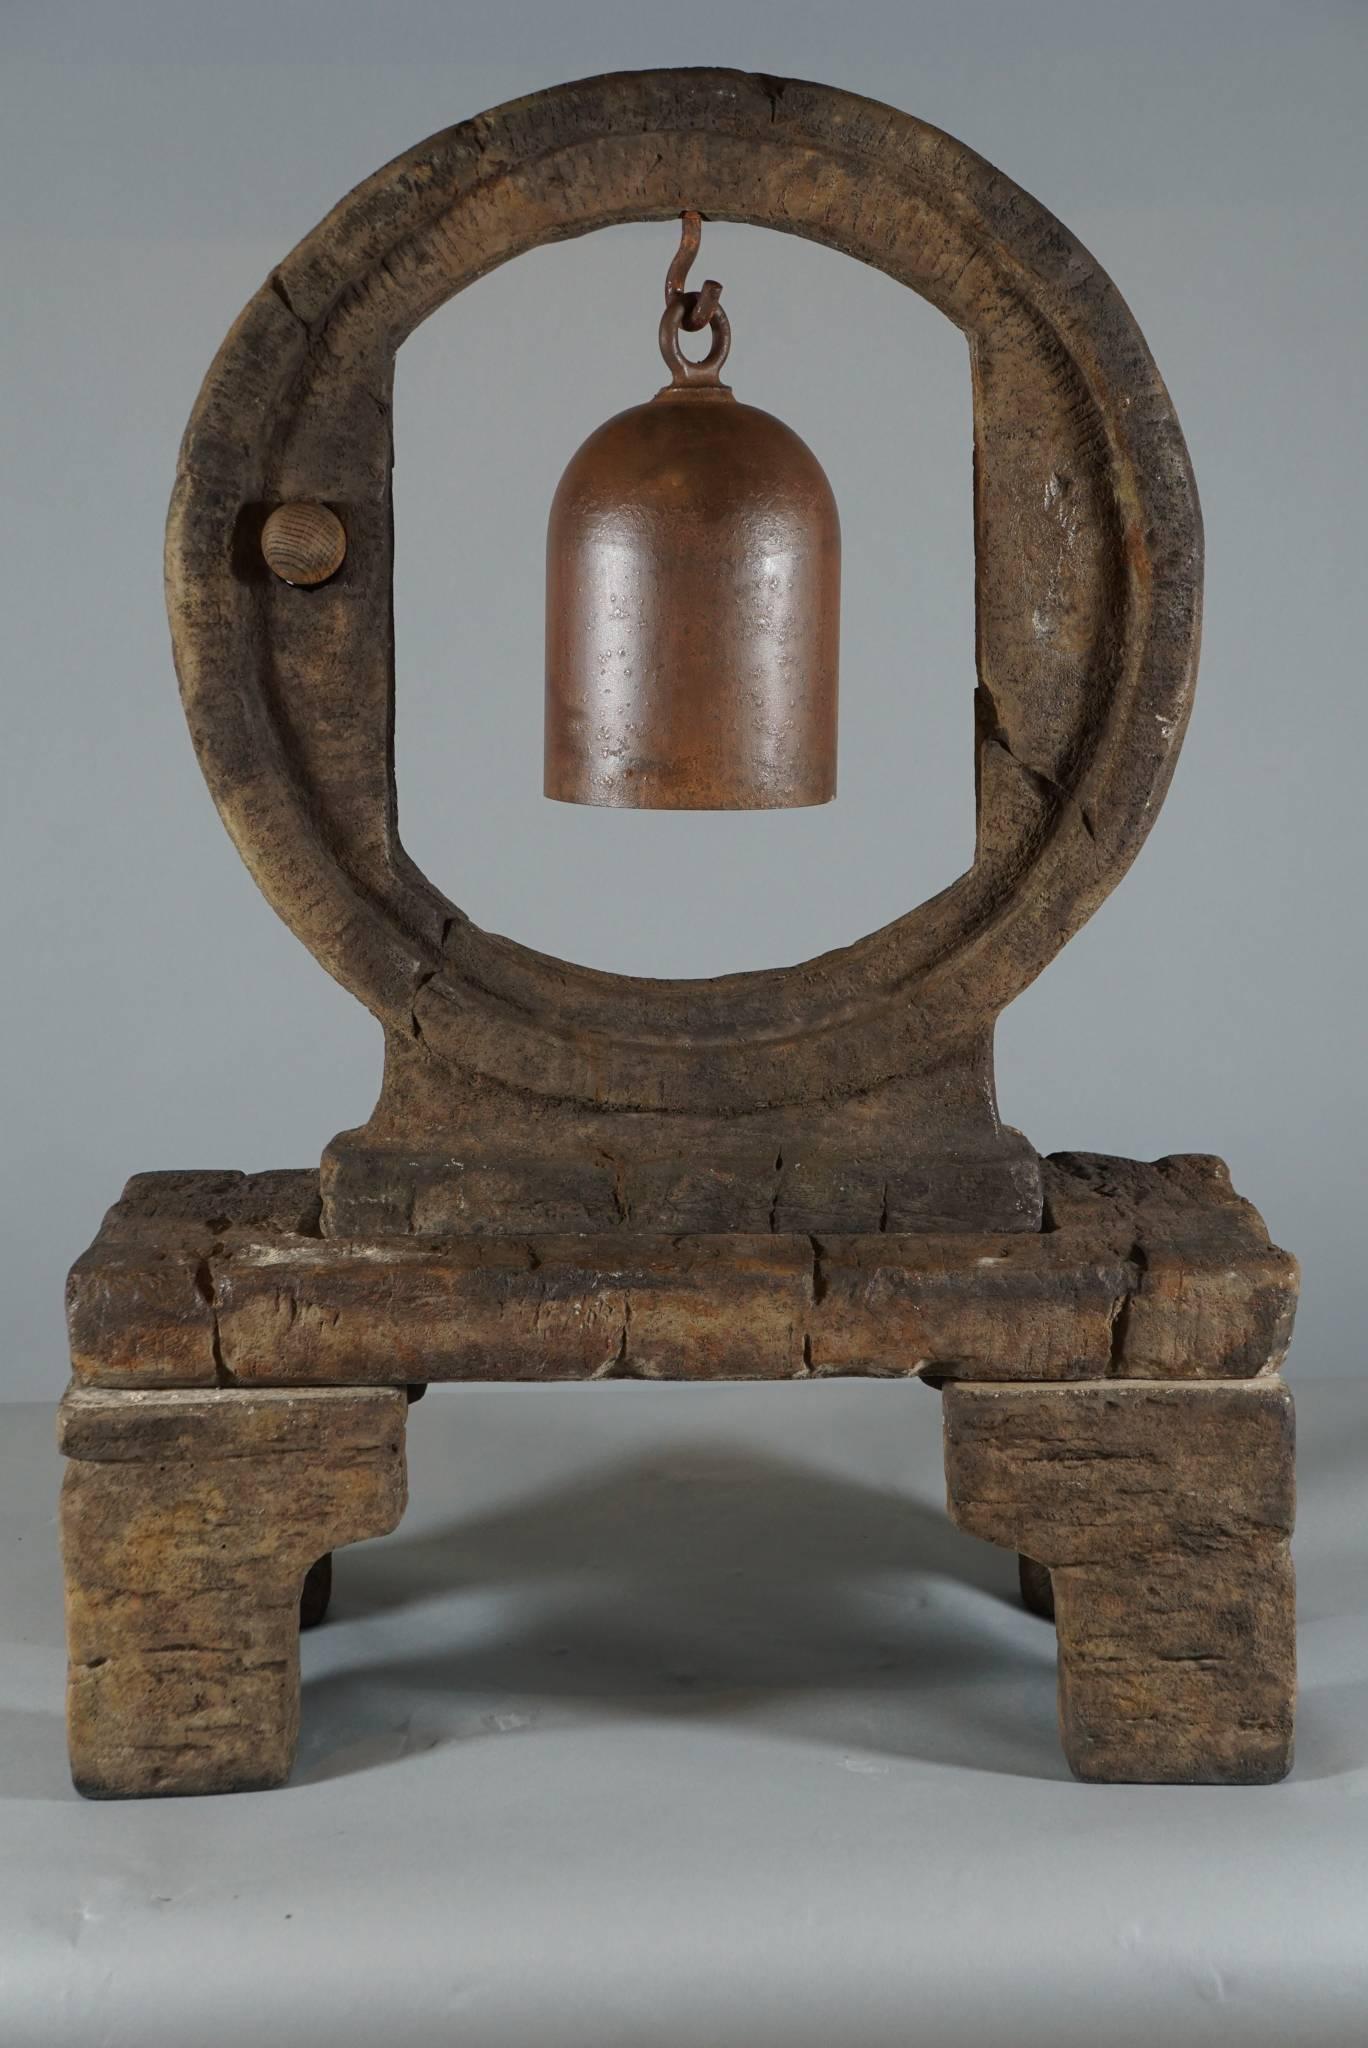 Chinoiserie Resonant Iron Bell Suspended in Large Cast Stone Wheel on Stand